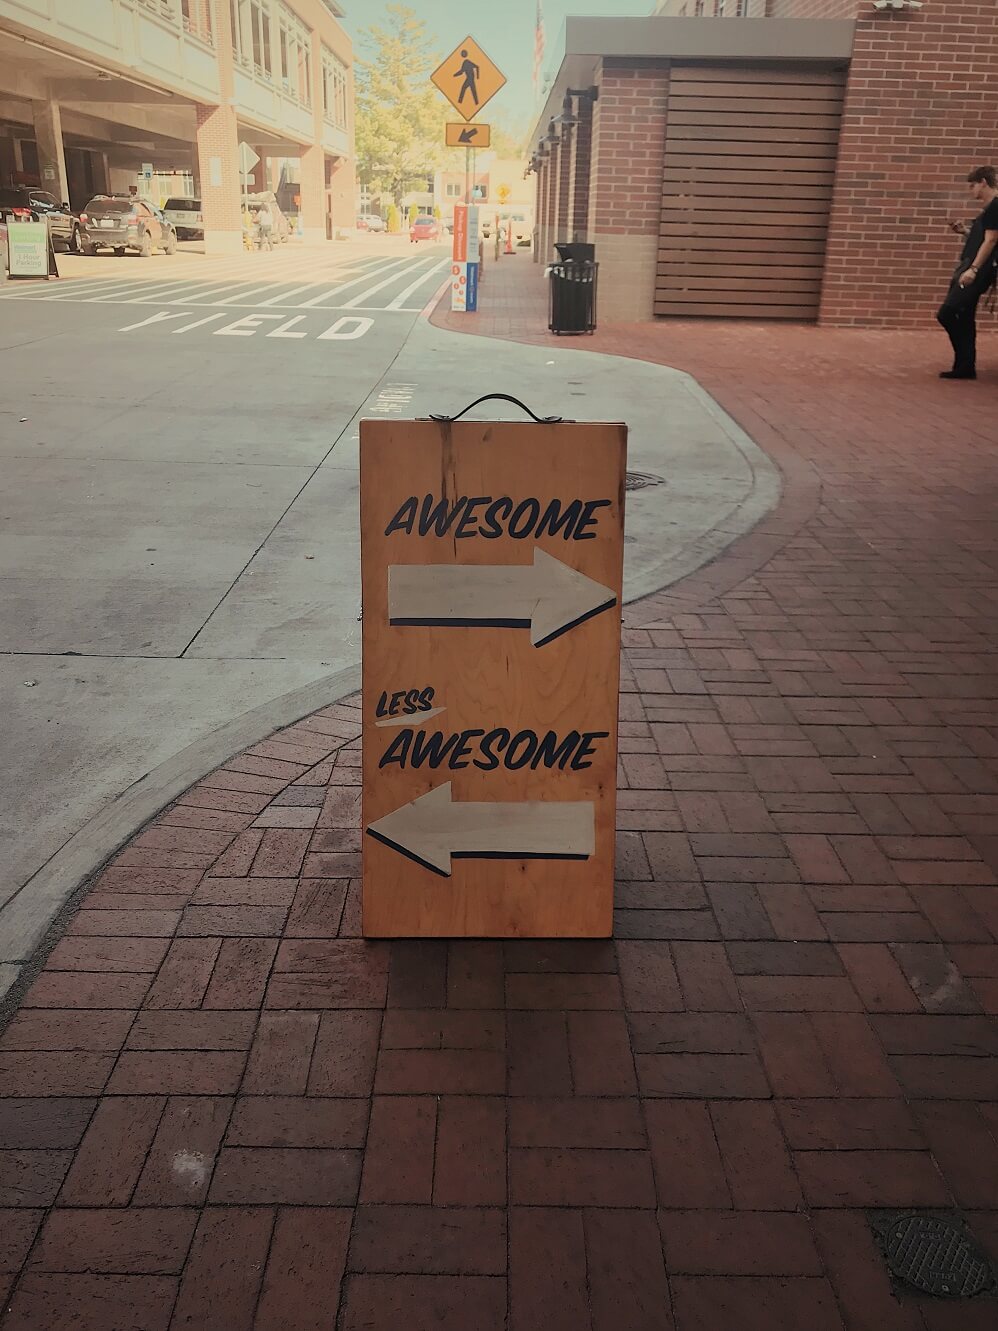 sign that says awesome with pointing arrow and less awesome with arrow pointing in other direction